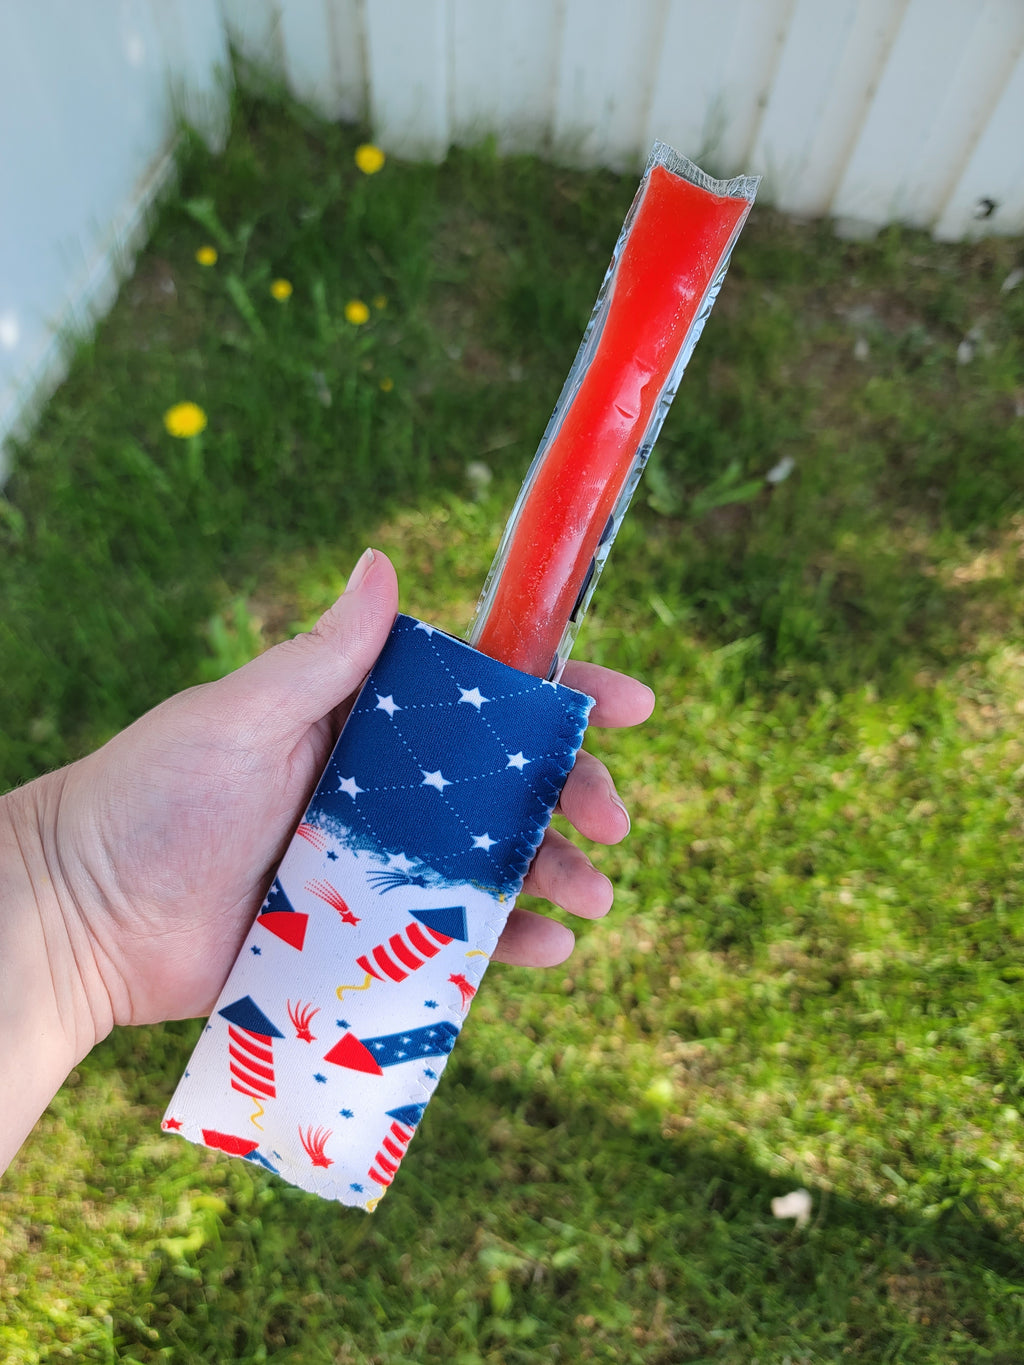 The kaboom  popsicle holder